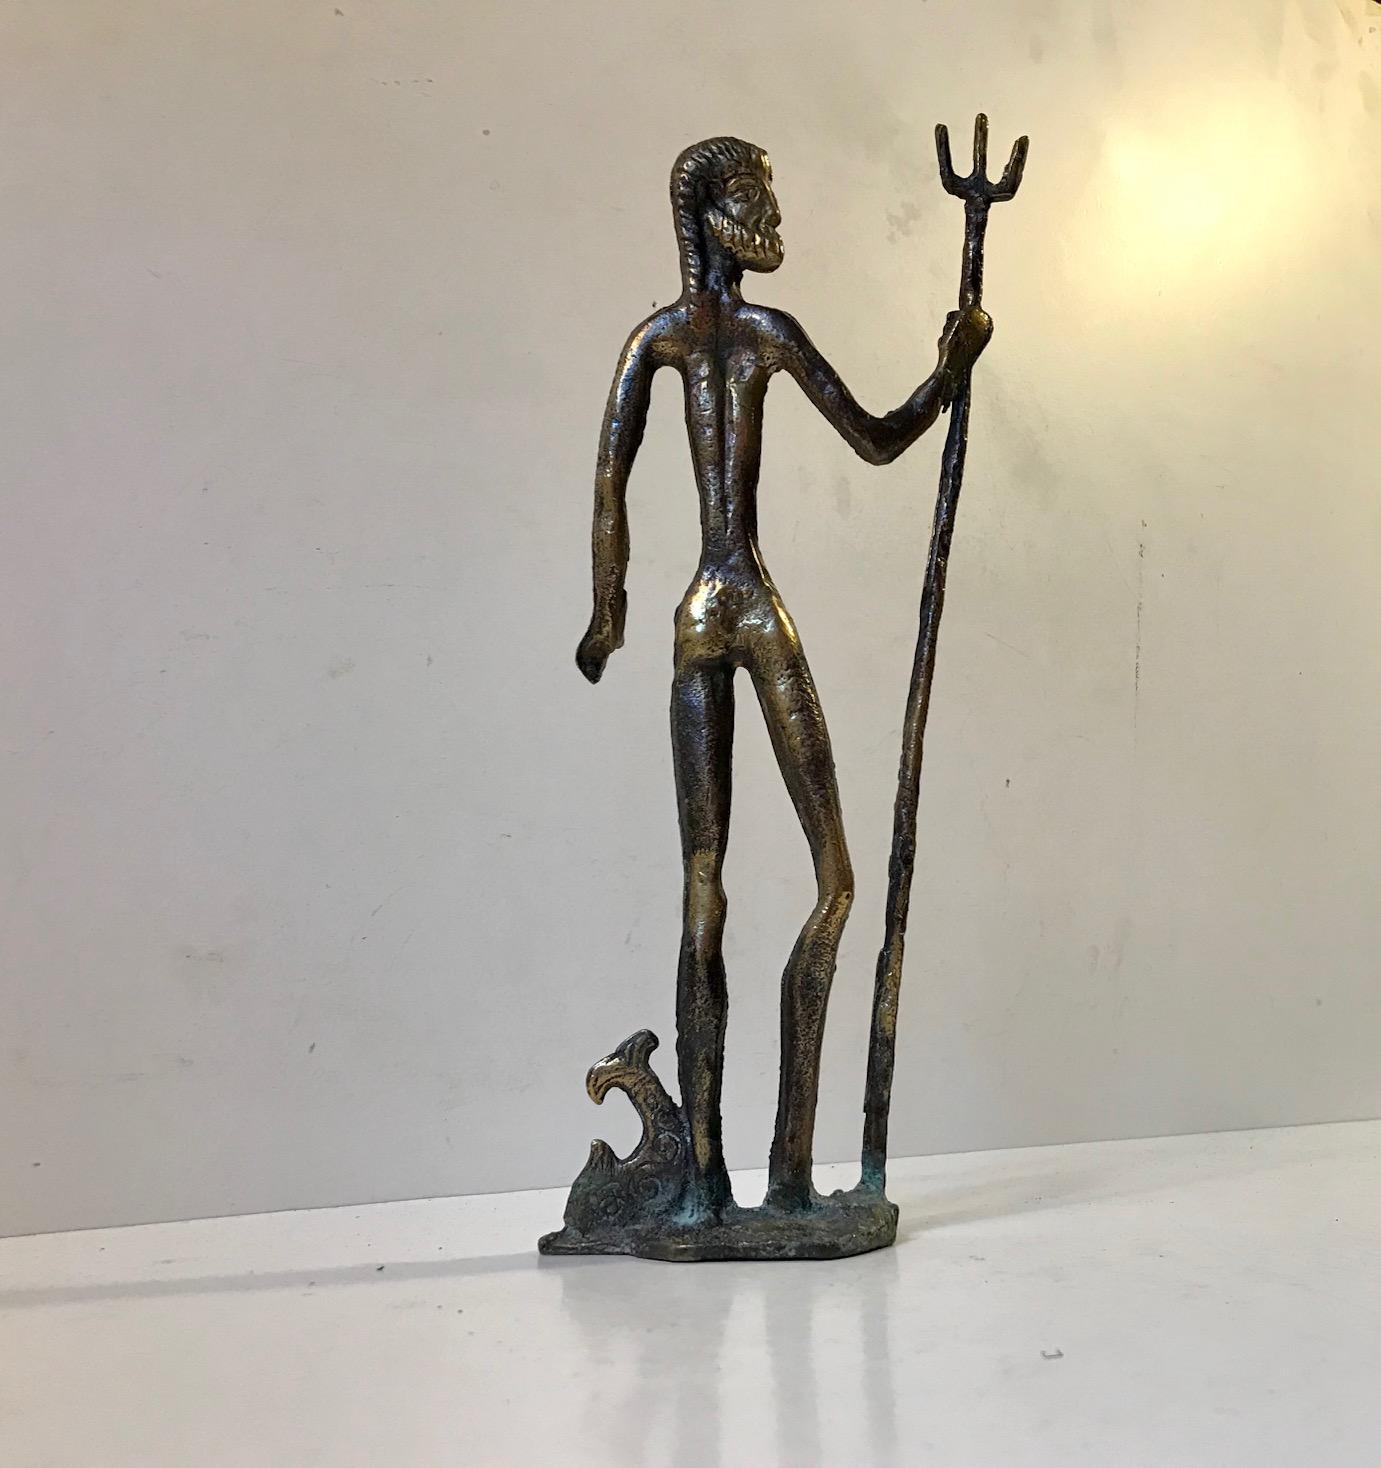 Almost in a style reminiscent of Giacometti this lean bronze sculpture depicting Poseidon has a Primitive, naive and yet modern expression about it. The patina to the bronze indicates quite a bit of age. Its origin however is unknown. It does not